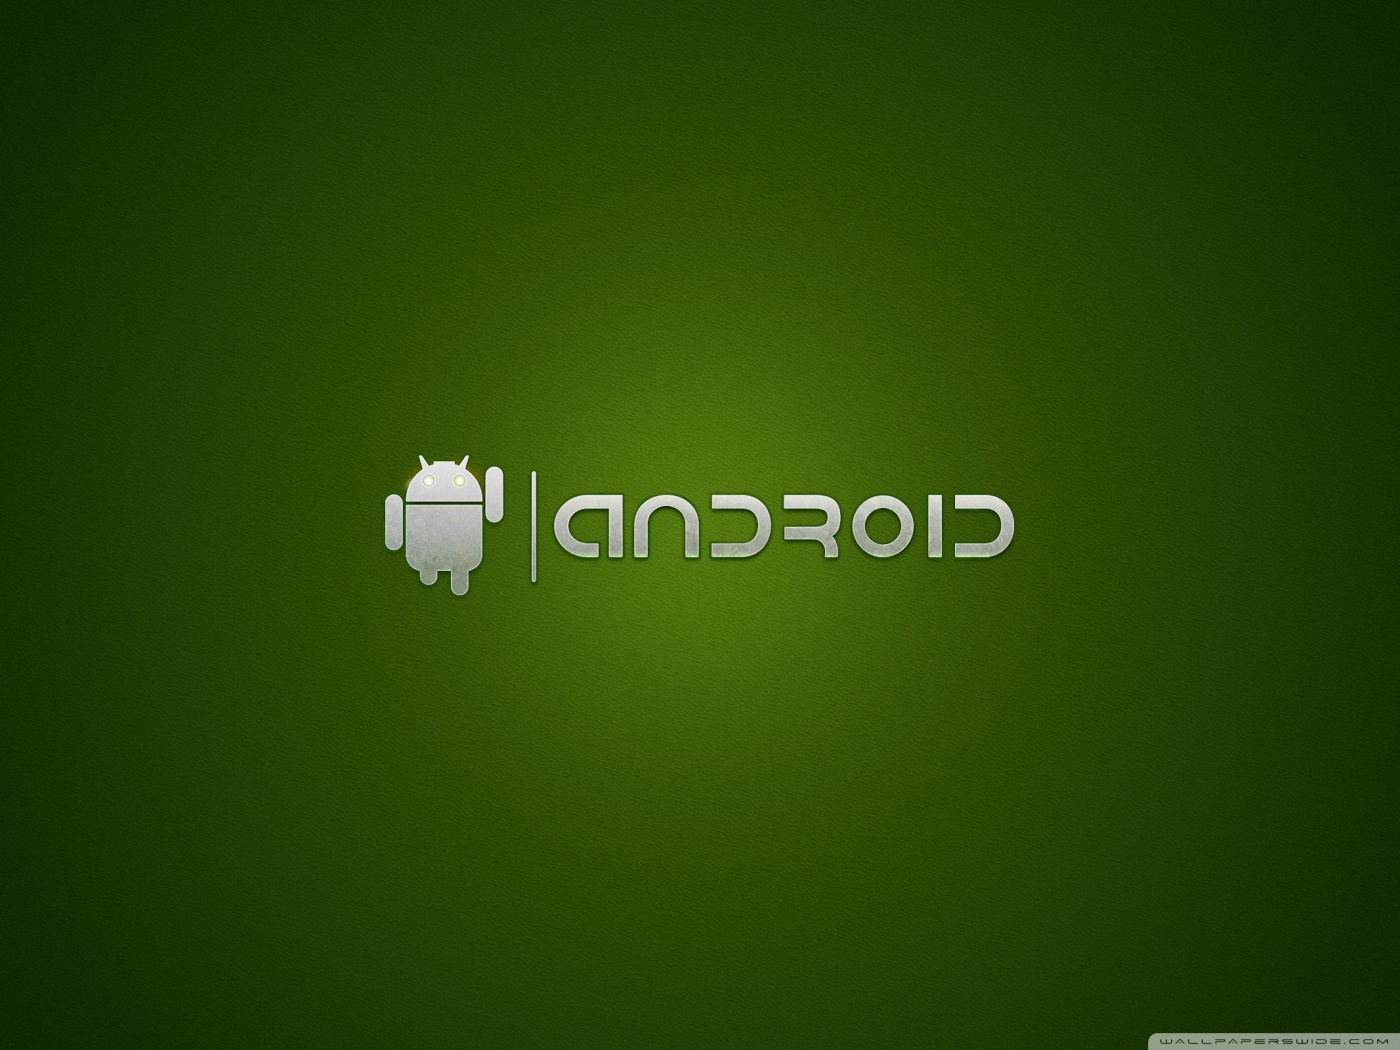 Android logo 1080P, 2K, 4K, 5K HD wallpapers free download | Wallpaper Flare